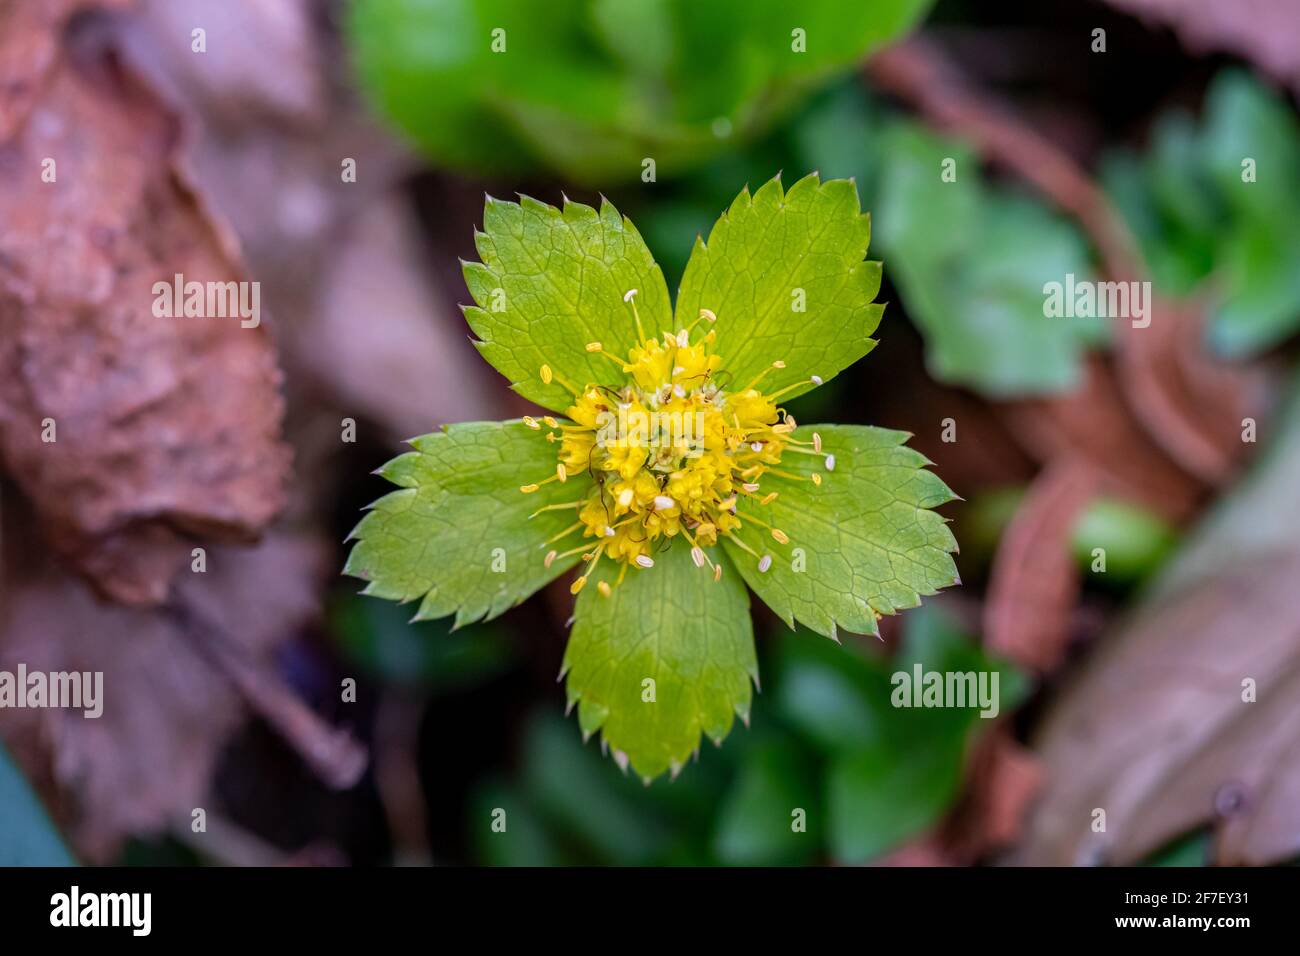 Hacquetia epipactis plant growing in forest, close up Stock Photo